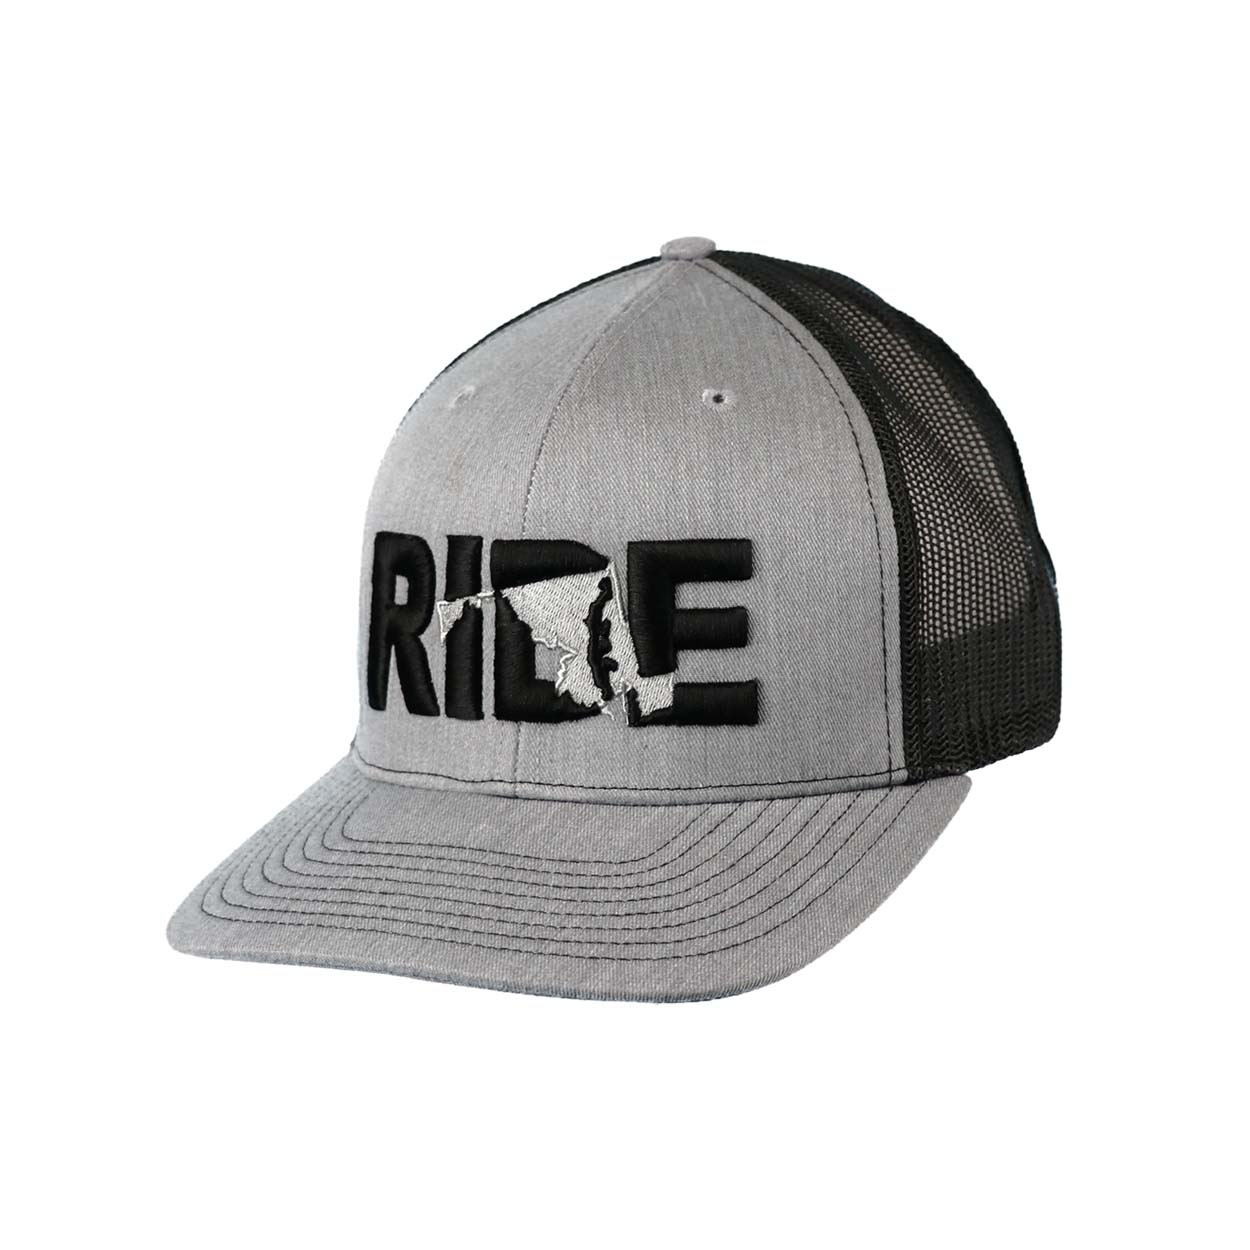 Ride Maryland Classic Embroidered Snapback Trucker Hat Heather Gray/Black